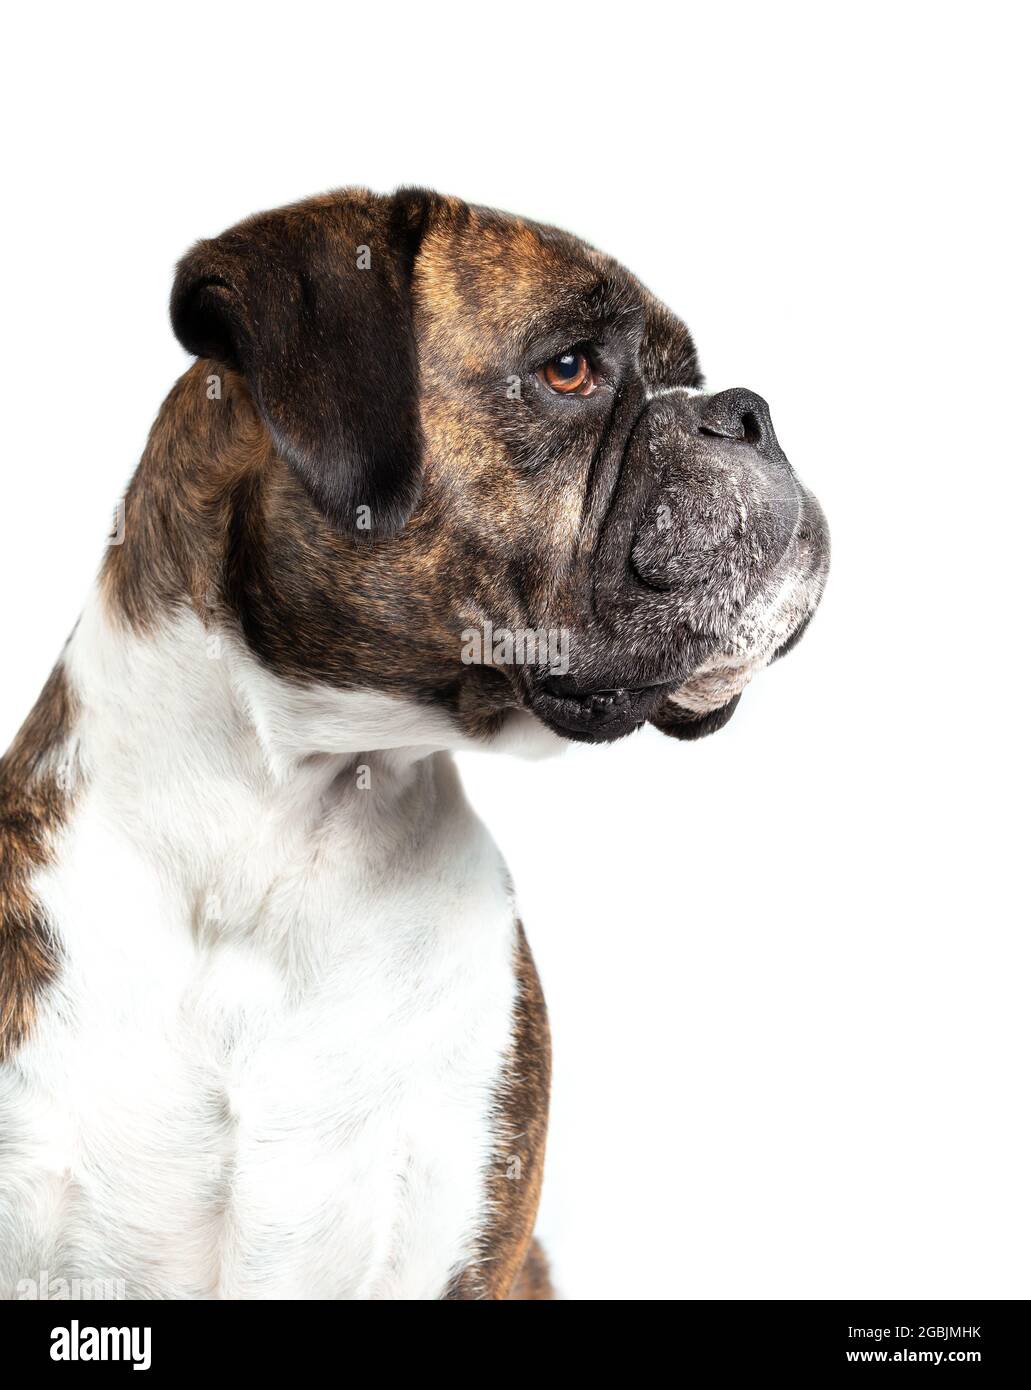 Isolated dog looking at something off screen. Partial side profile of adult female Boxer dog sitting, with brindle coloring. Medium to large short hai Stock Photo